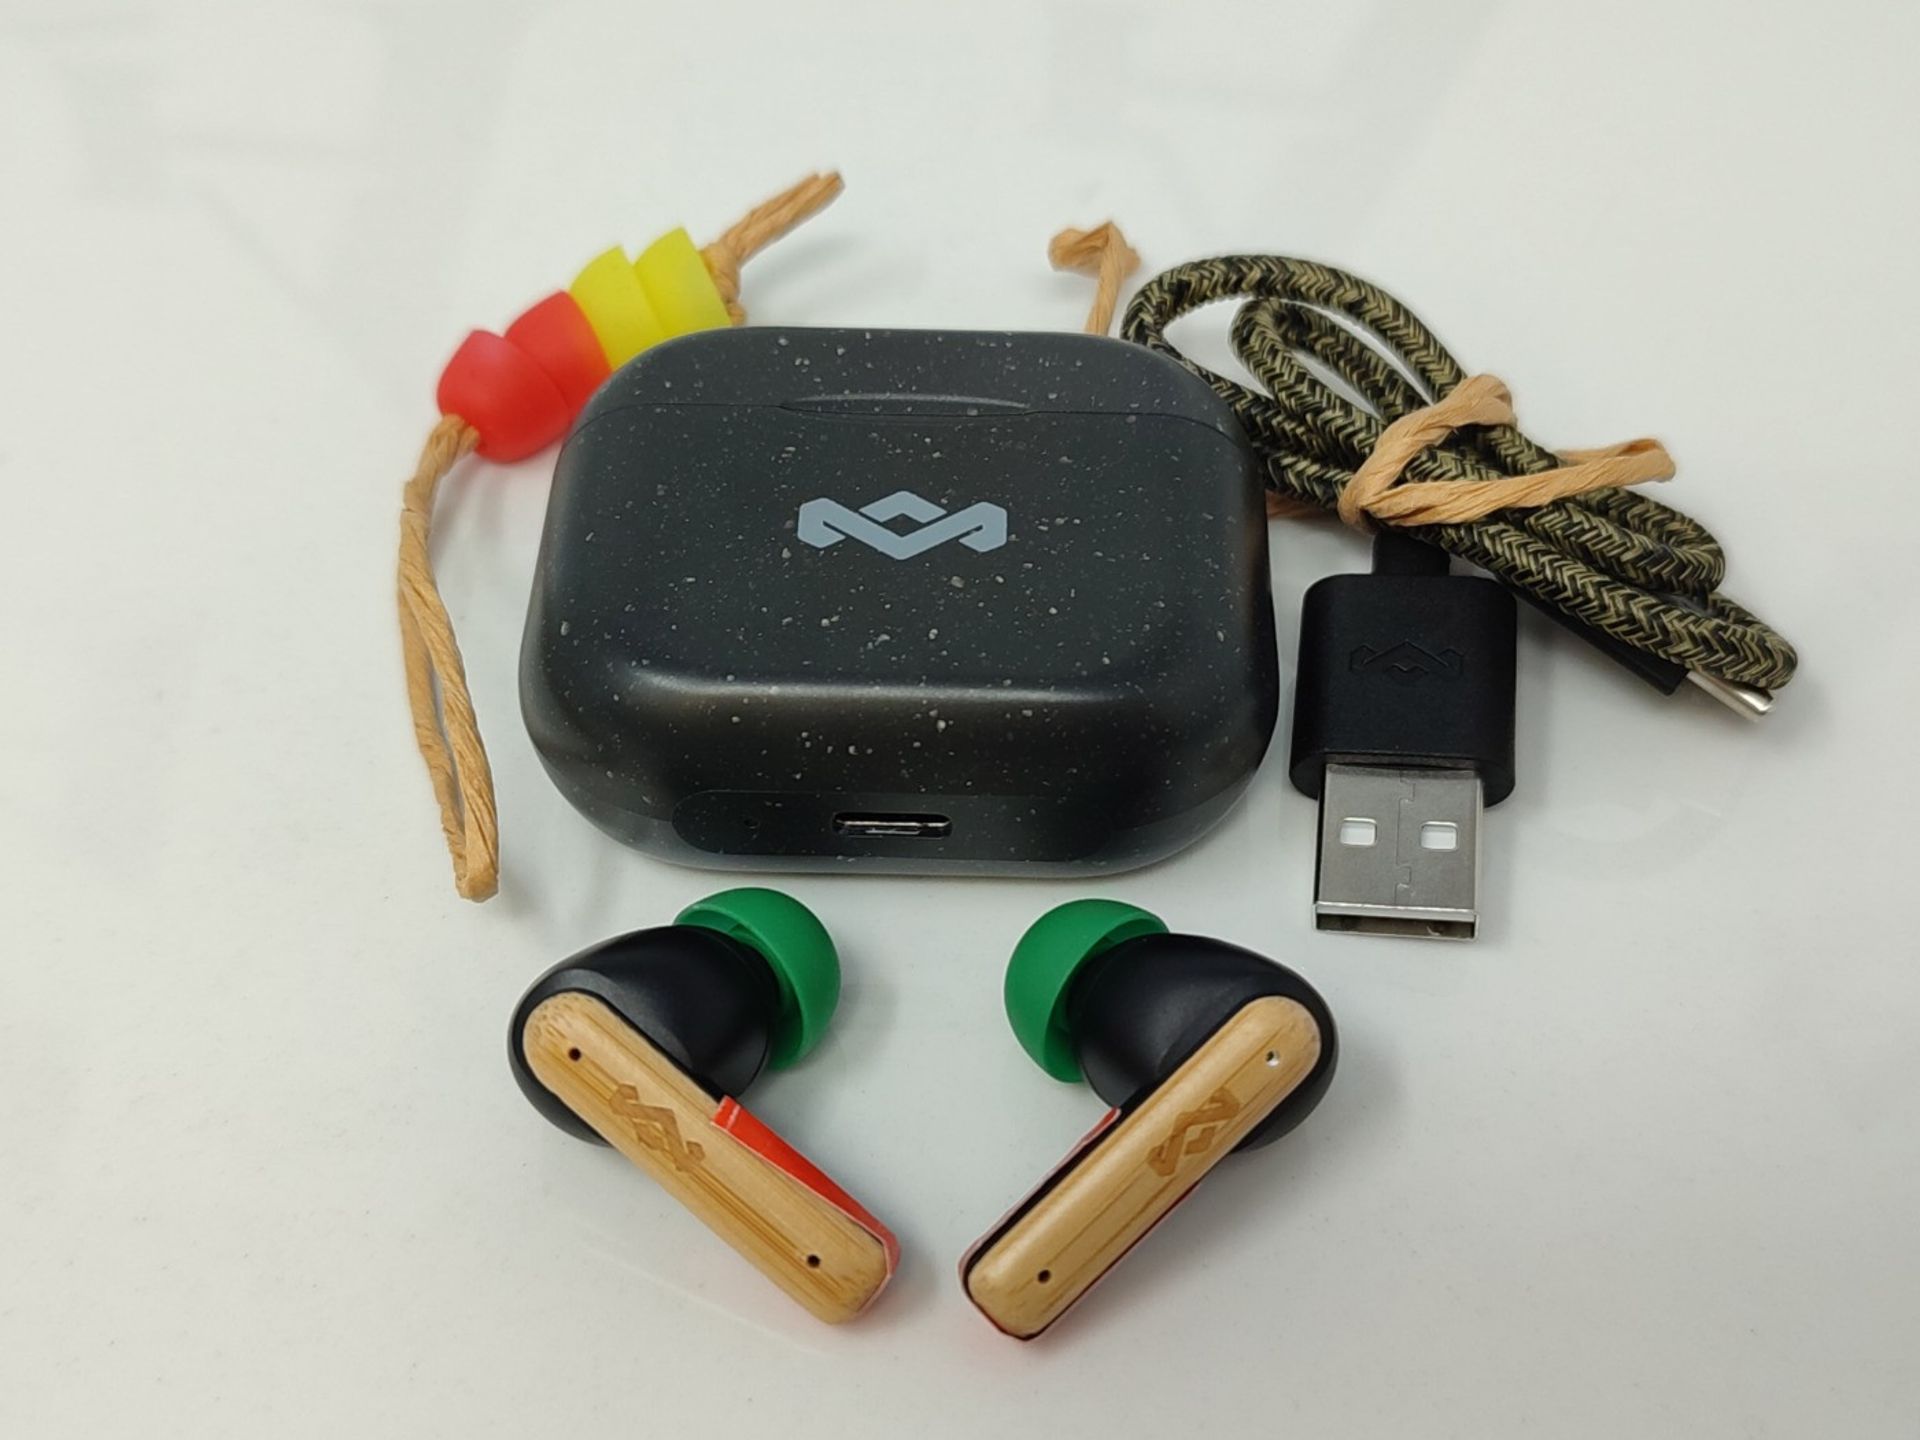 House of Marley Little Bird True Wireless Earbuds, Touch Controls, Built-in Microphone - Image 3 of 3